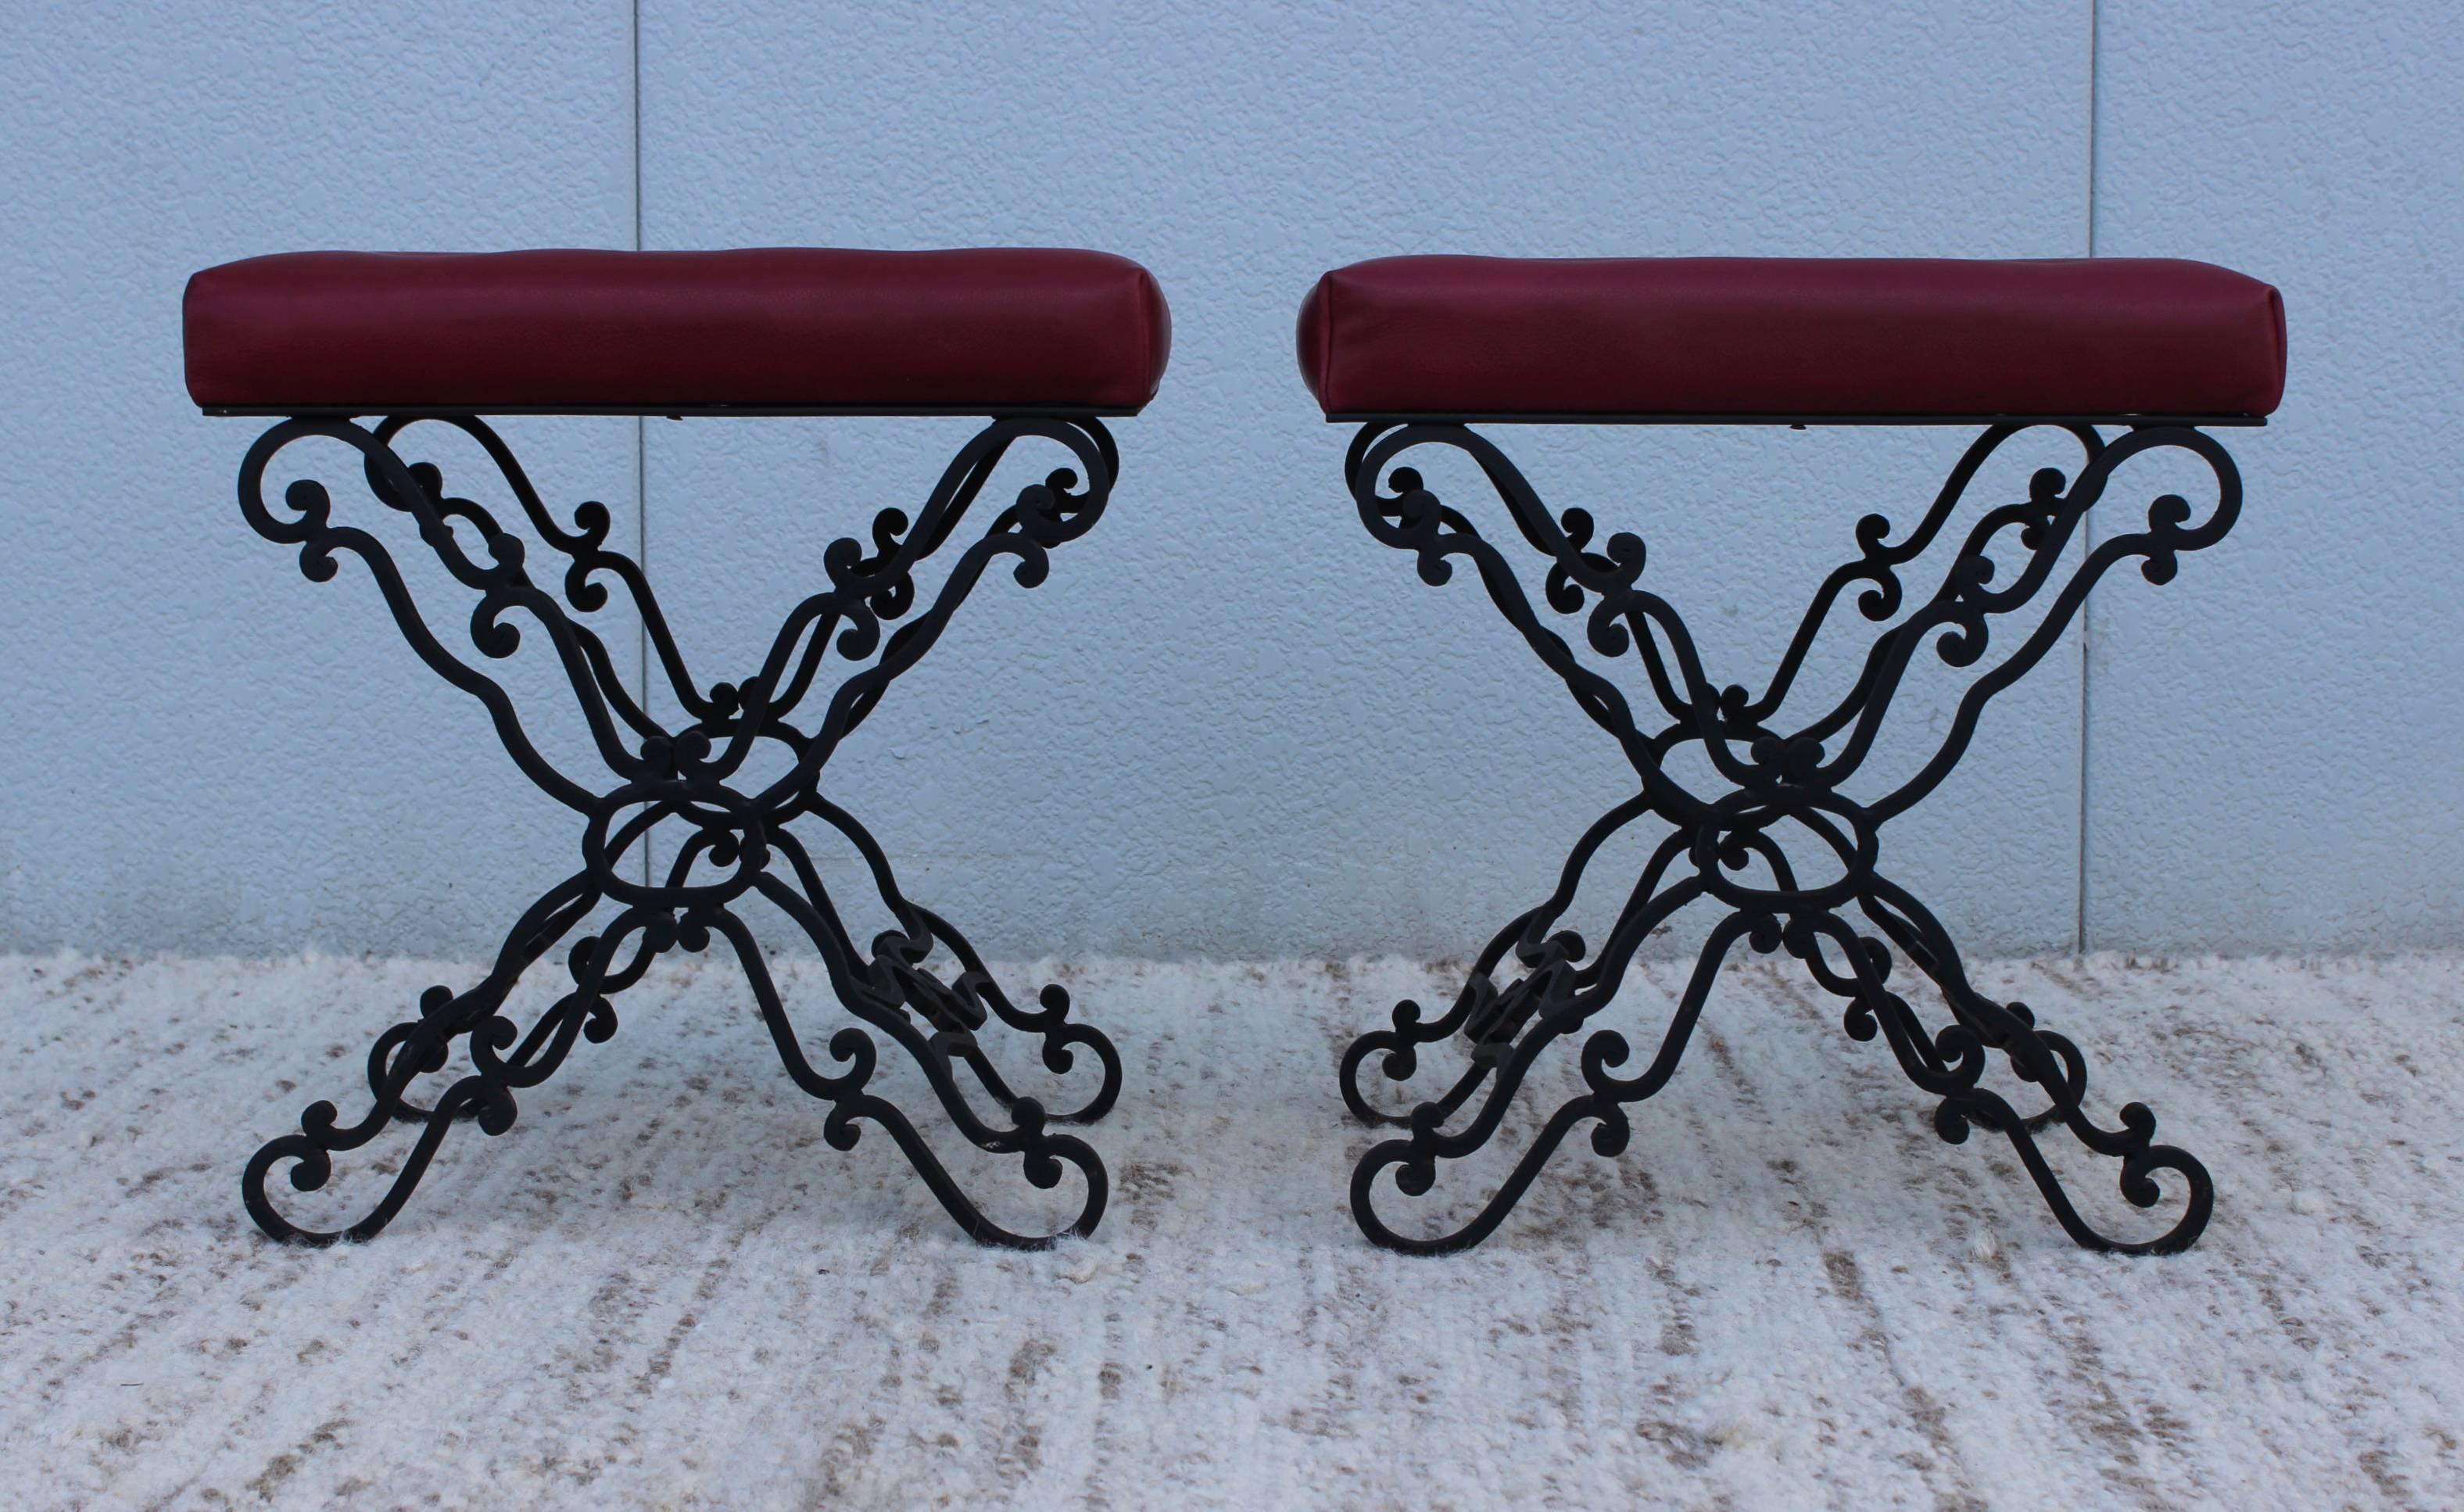 1960s iron base ottomans, newly reupholstered in leather with tufted detail.